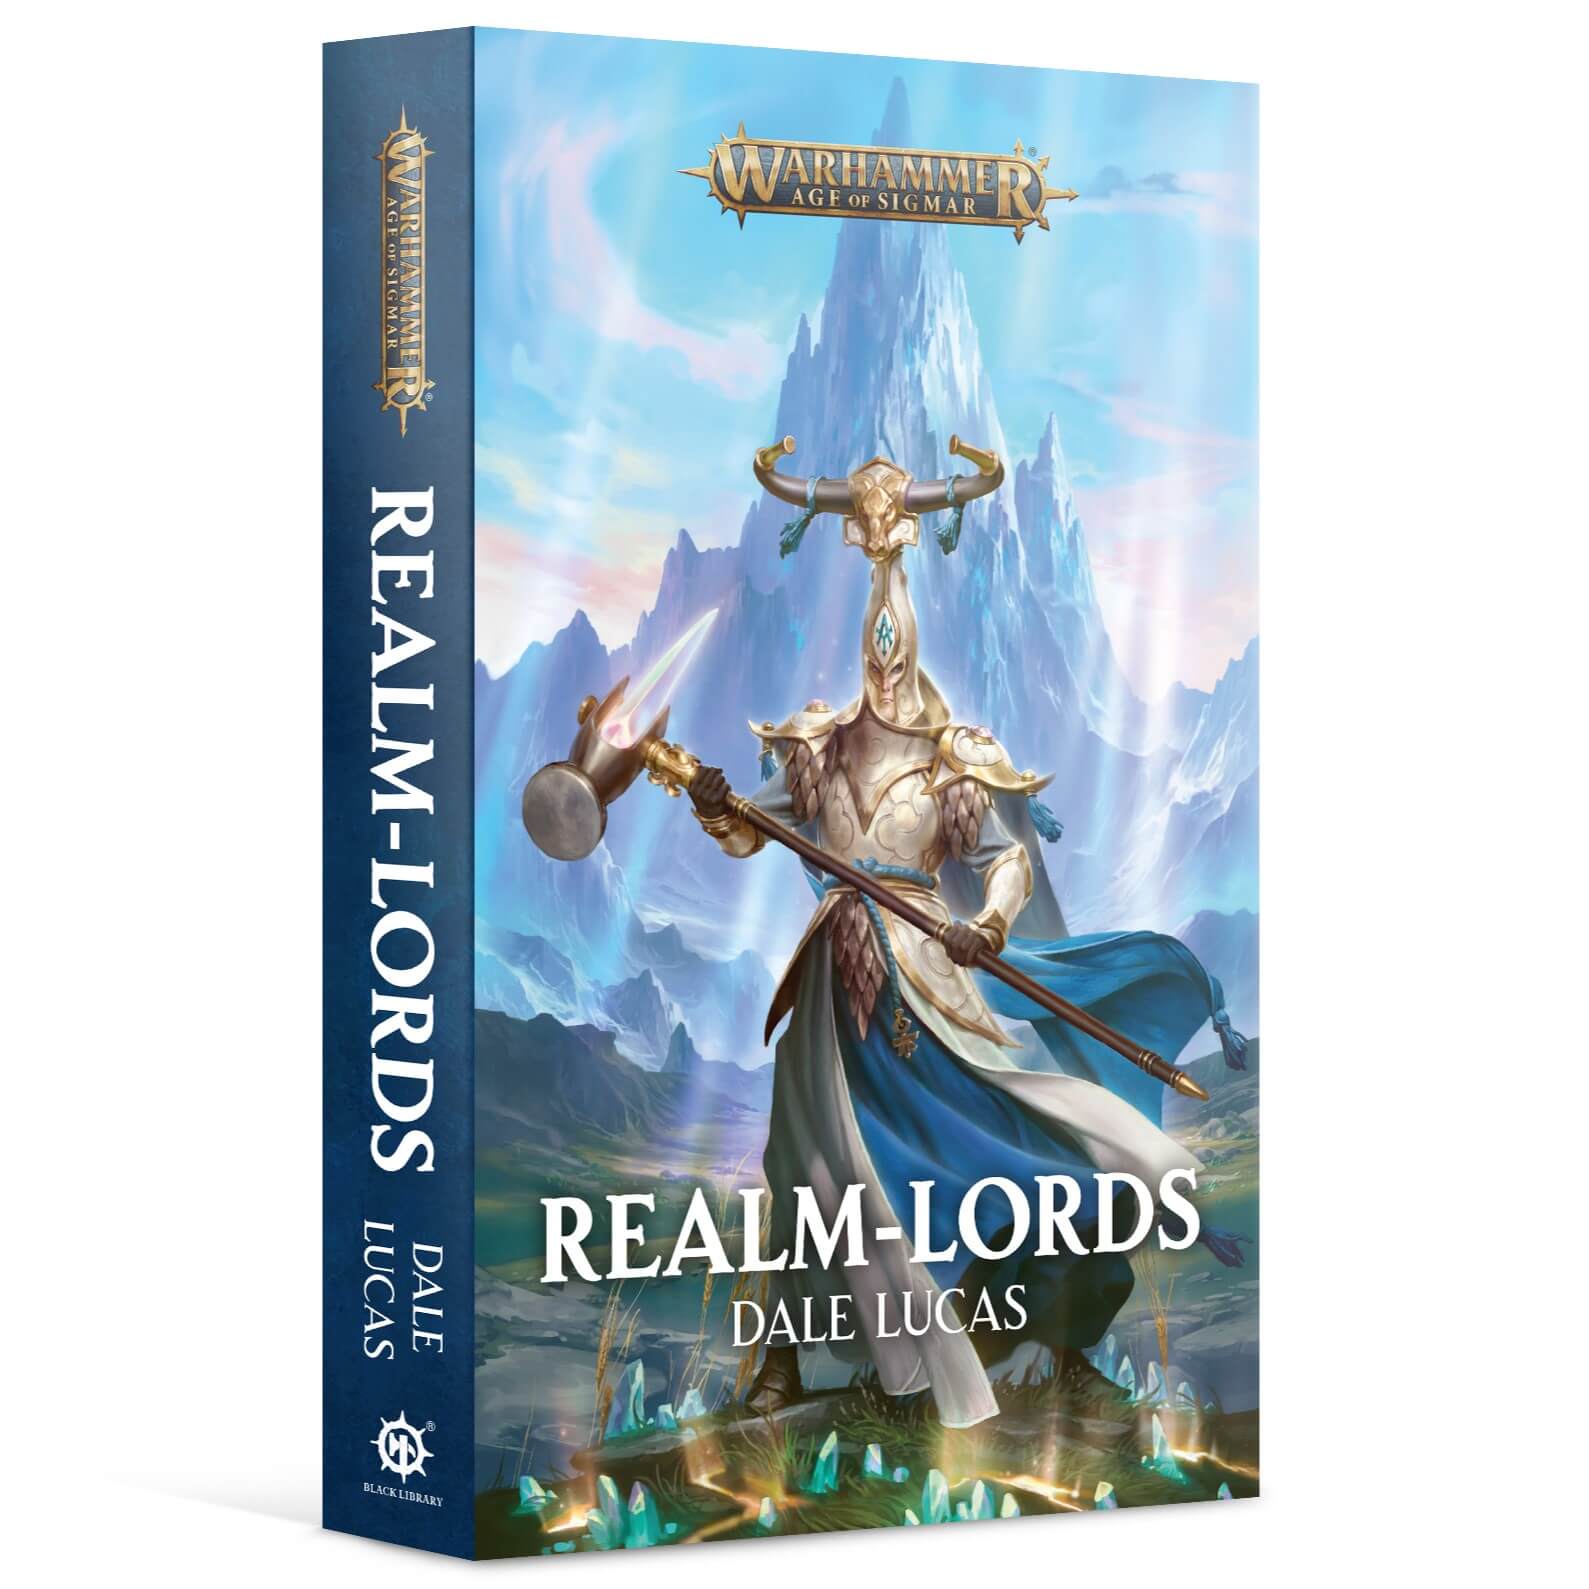 Product Image for Realm-Lords